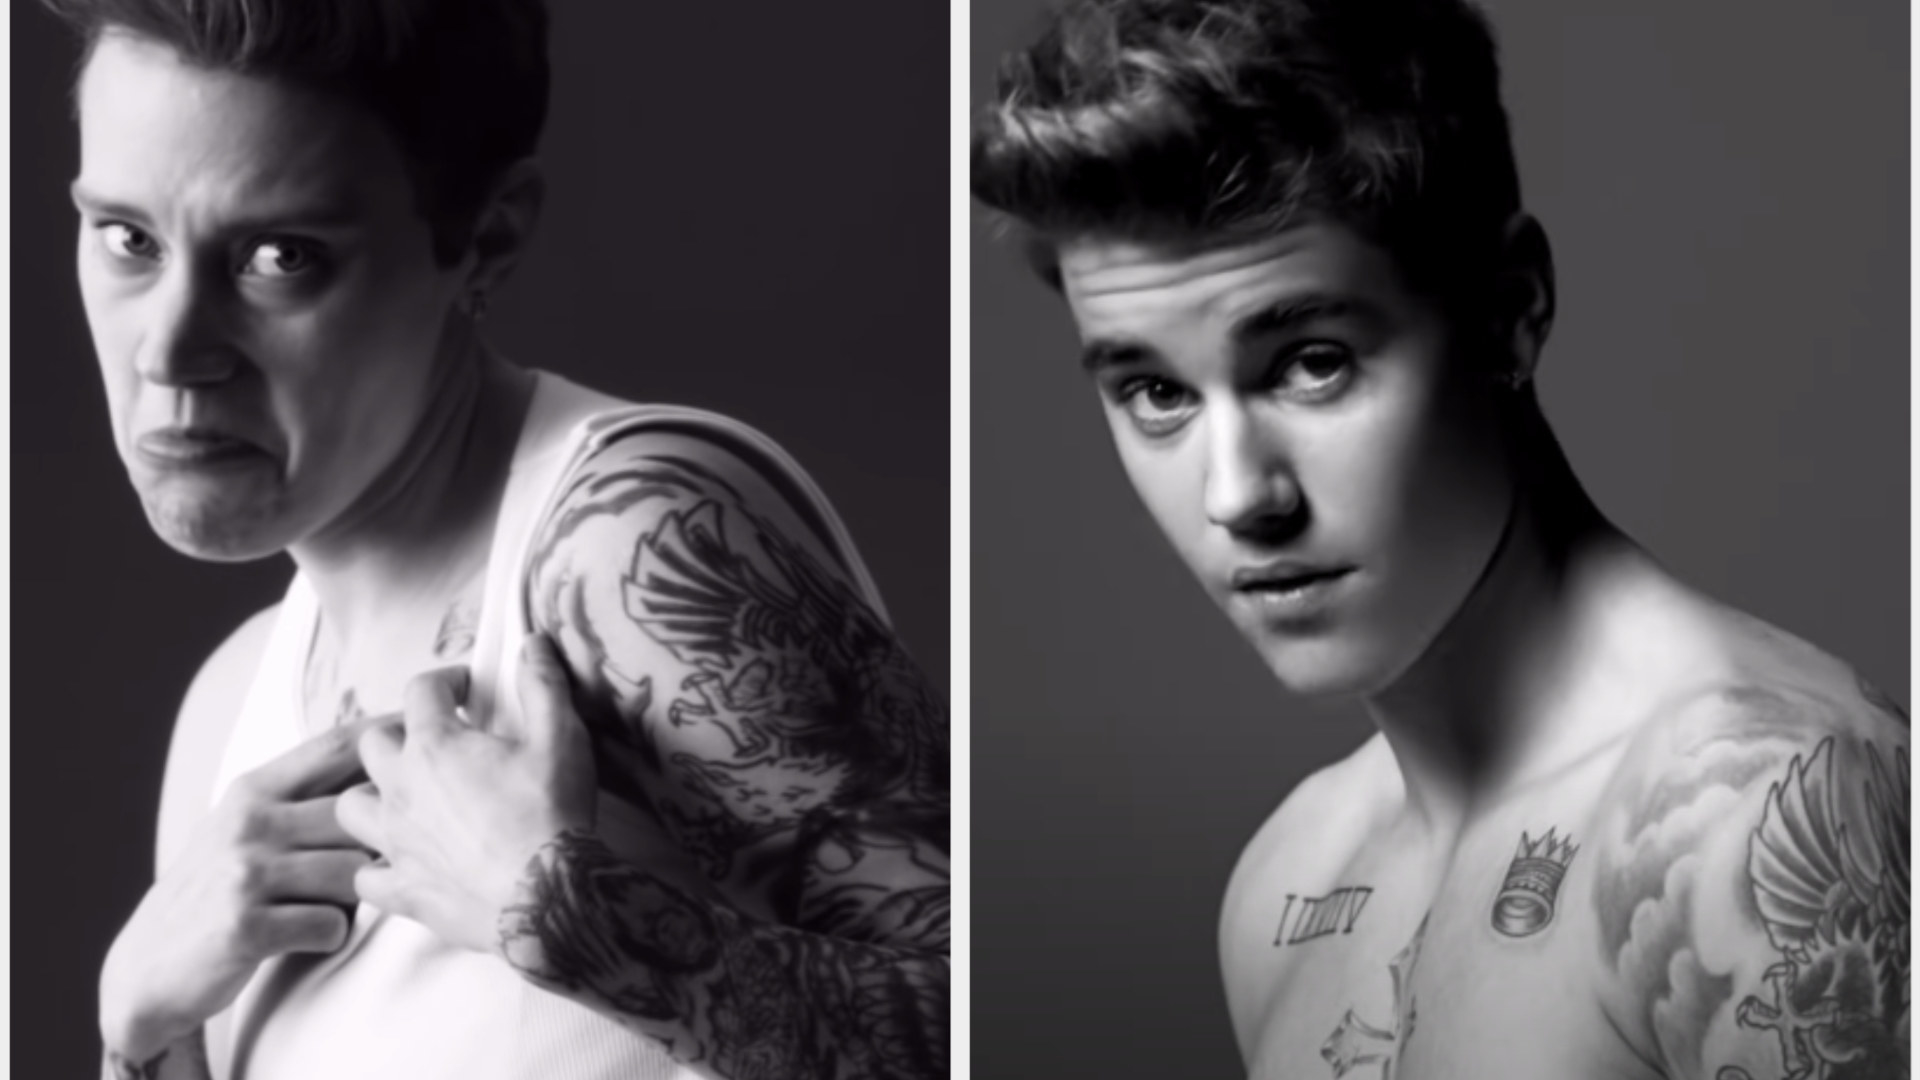 Justin Bieber in his black and white Calvin Klein ad side by side with Kate McKinnon in the same position